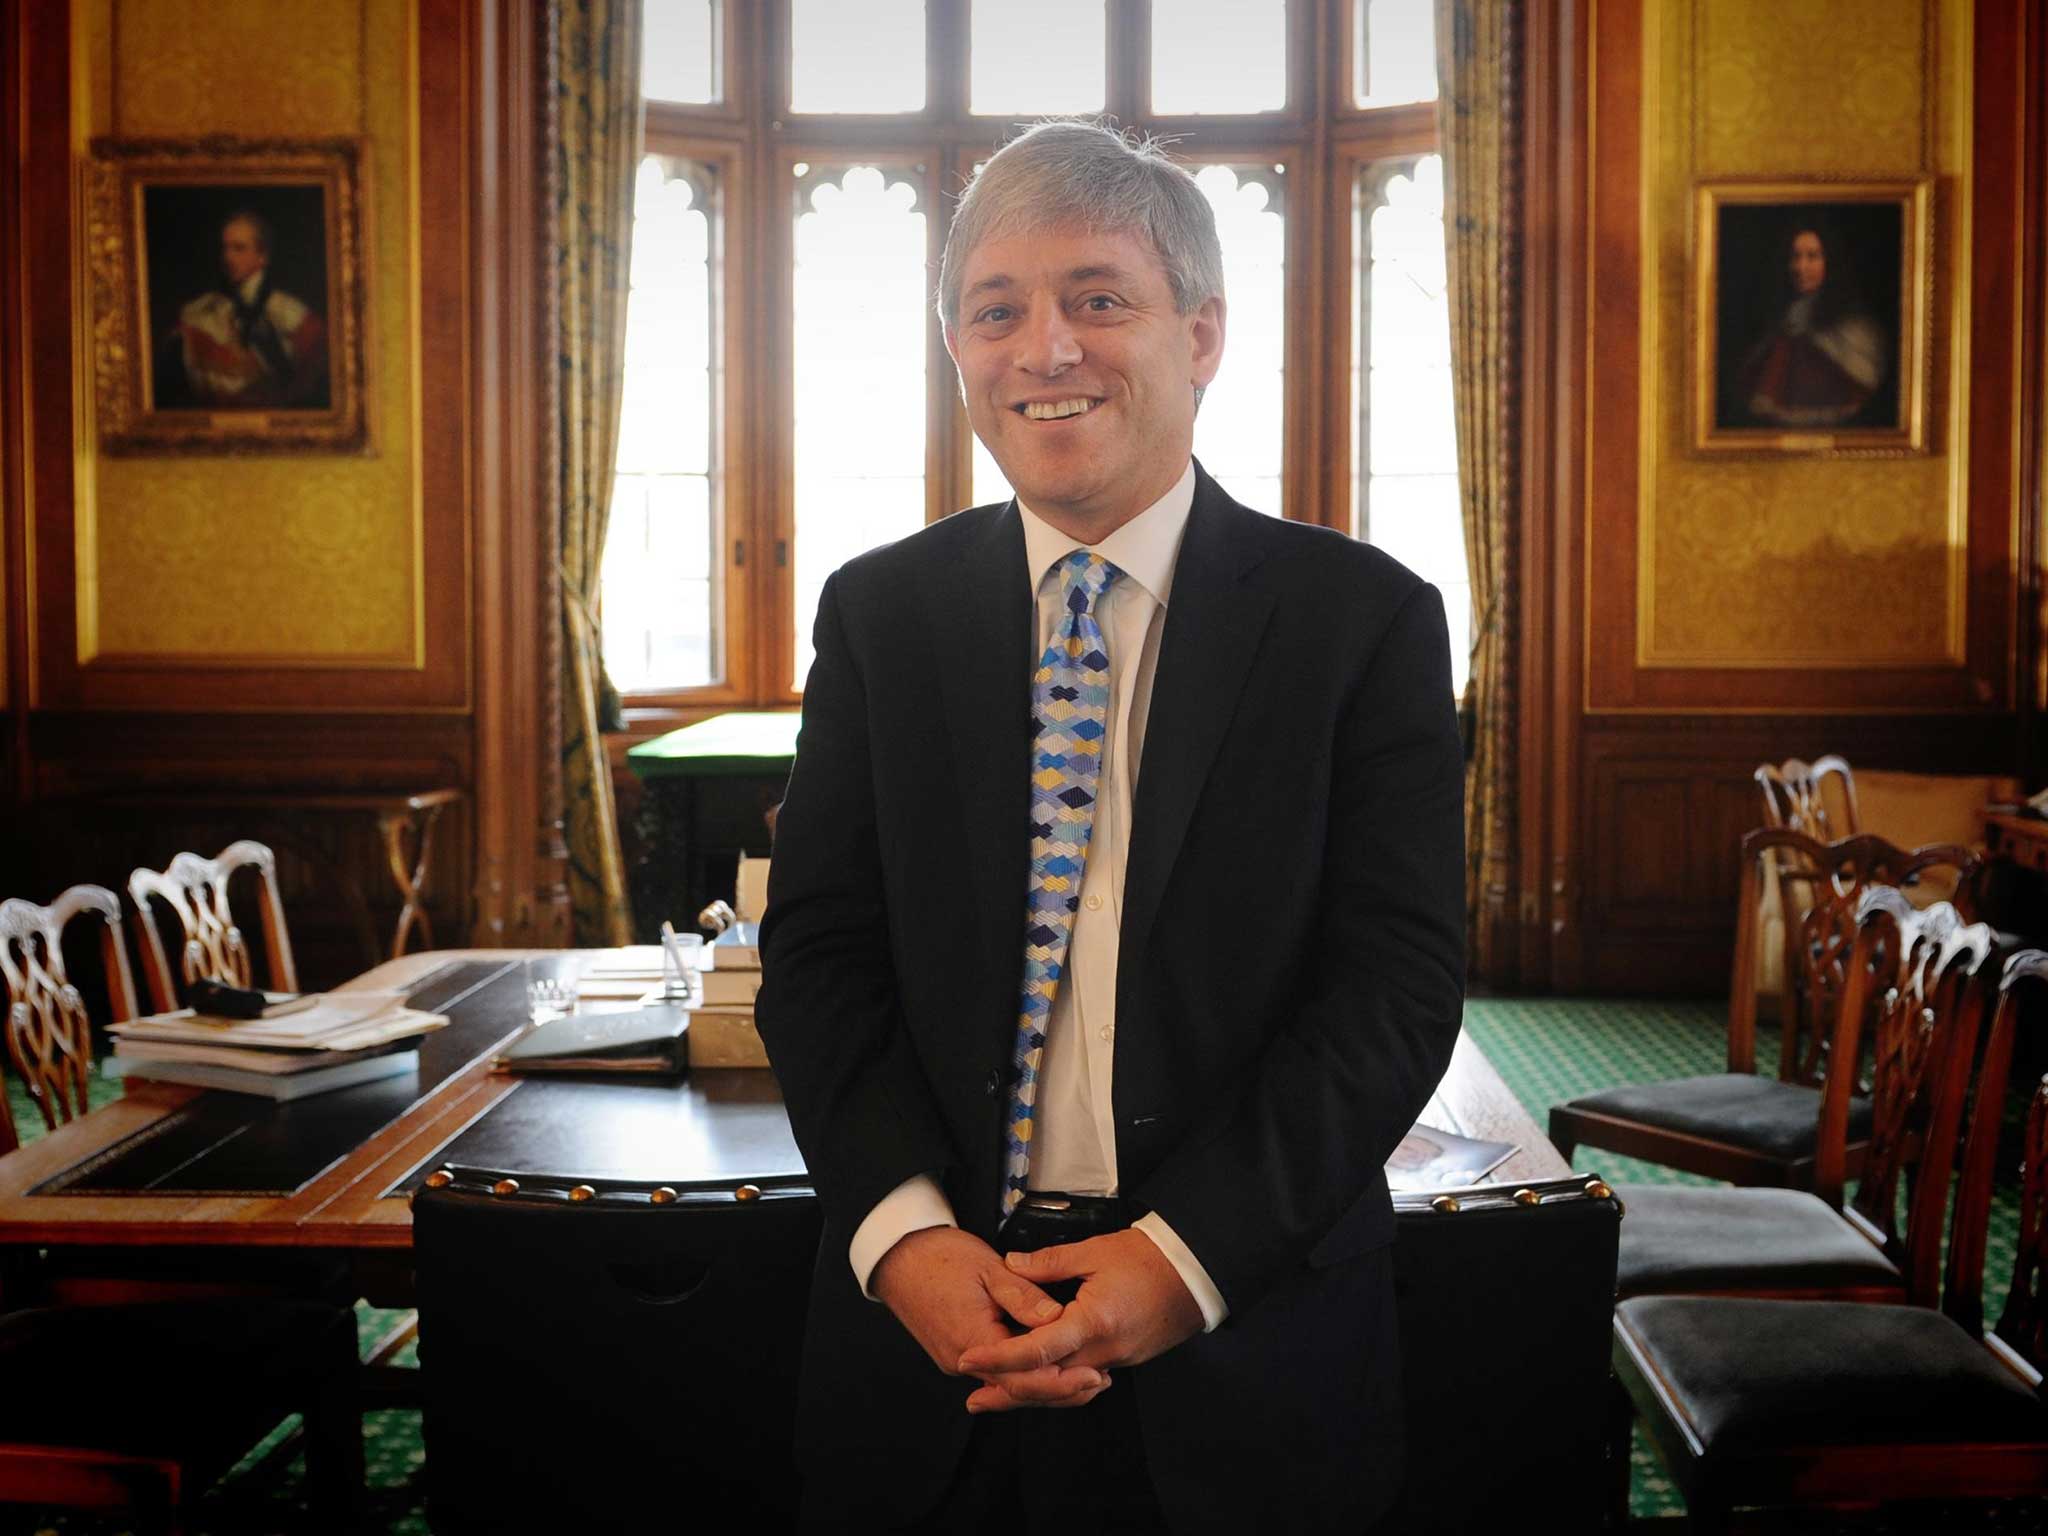 Fit for a queen: John Bercow had his family's nanny stay in the rent-free Speaker's apartment